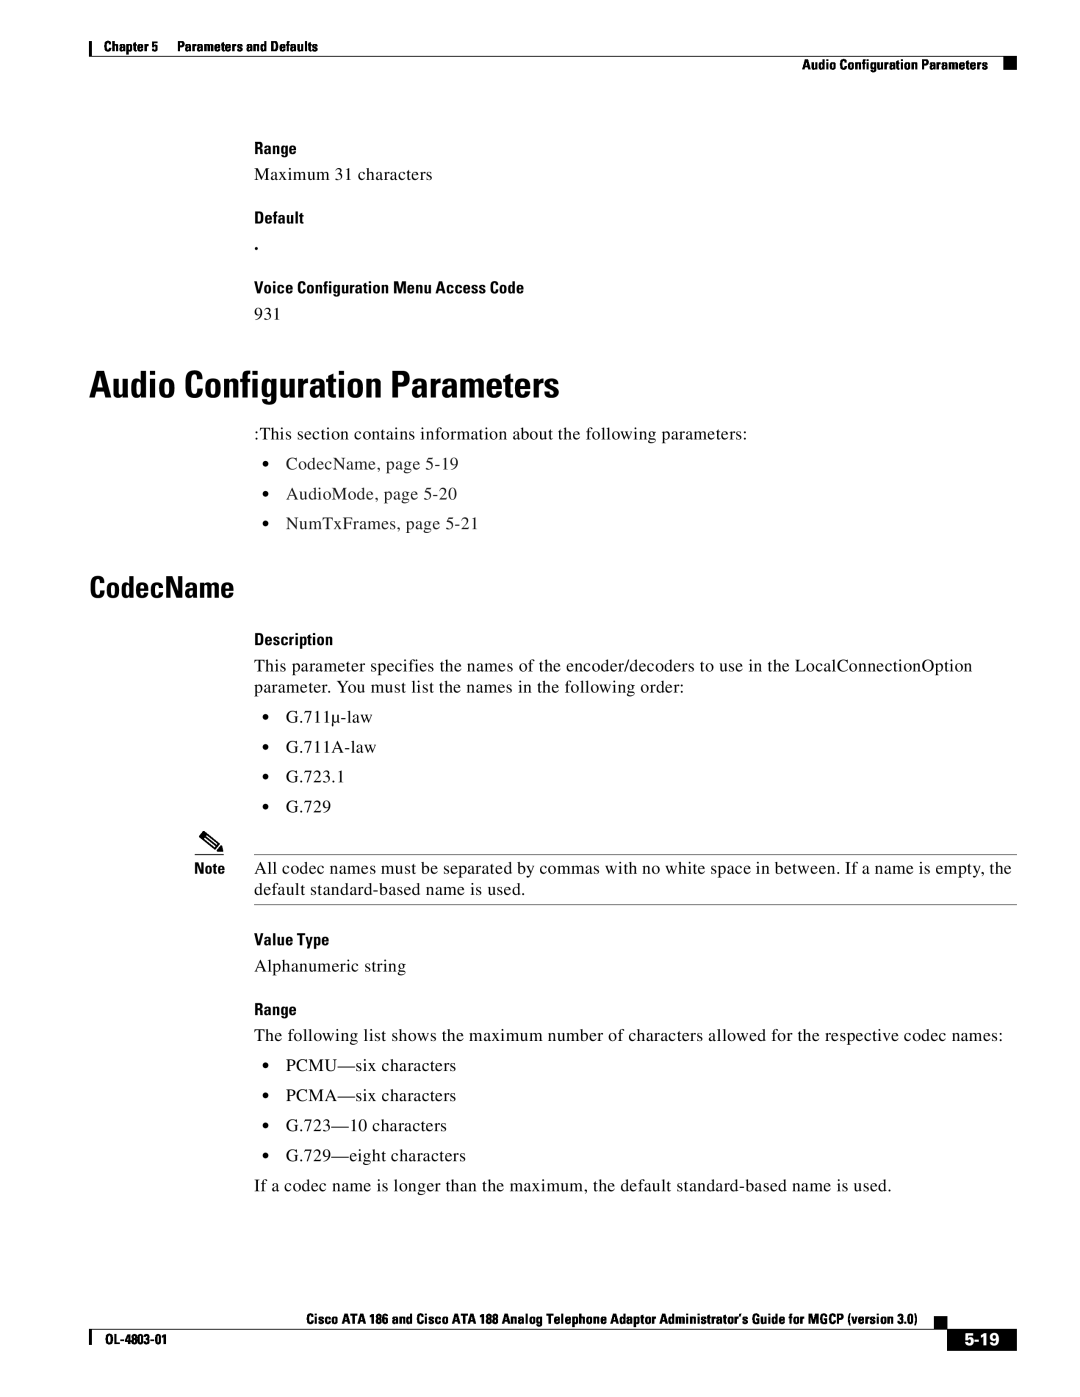 Cisco Systems ATA 186 Audio Configuration Parameters, CodecName, page AudioMode, page NumTxFrames, page, 5-19, Range 